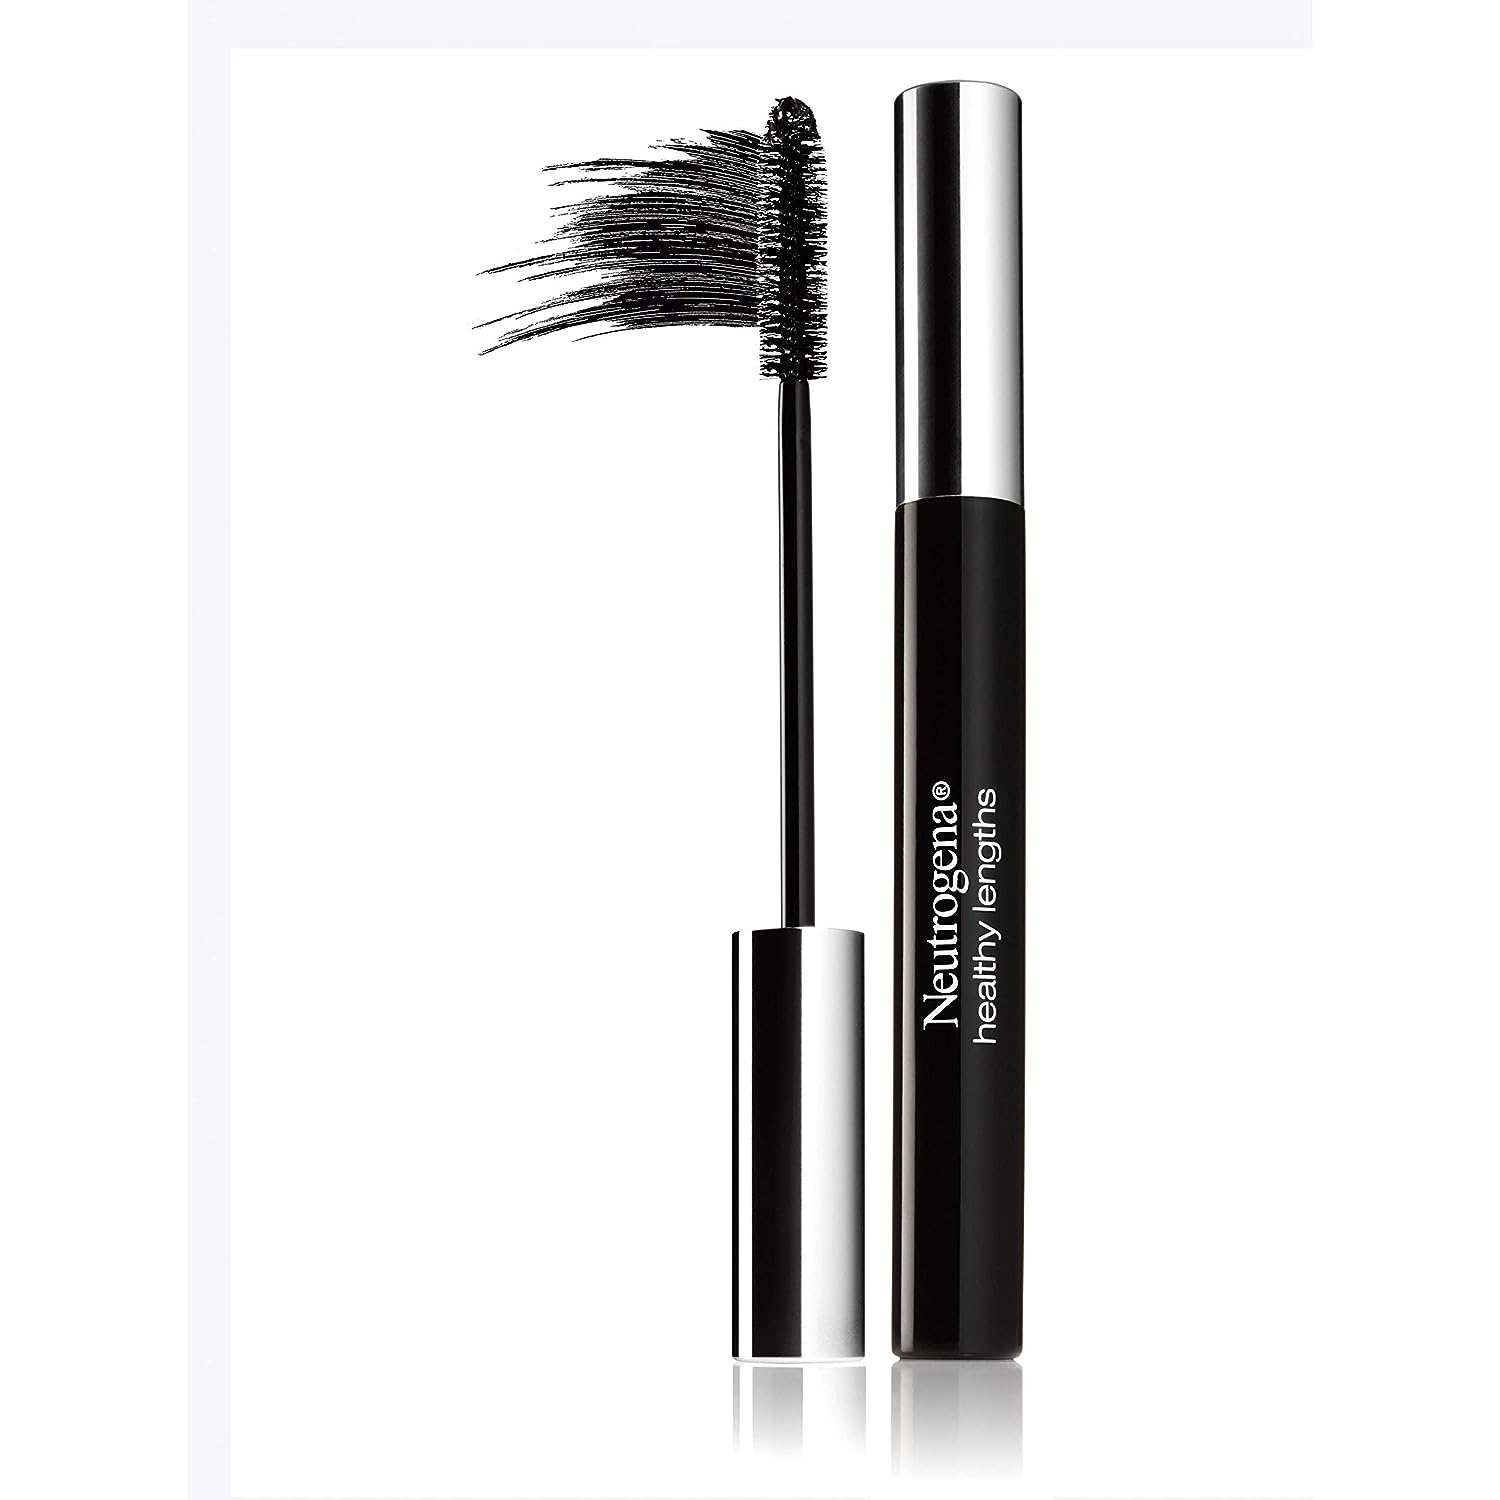 Neutrogena Healthy Lengths Mascara for Stronger, Longer Lashes, Clump-, Smudge- and Flake-Free Mascara with Olive Oil, Vitamin E and Rice Protein, Black 02,.21 oz : Beauty Products : Beauty & Personal Care